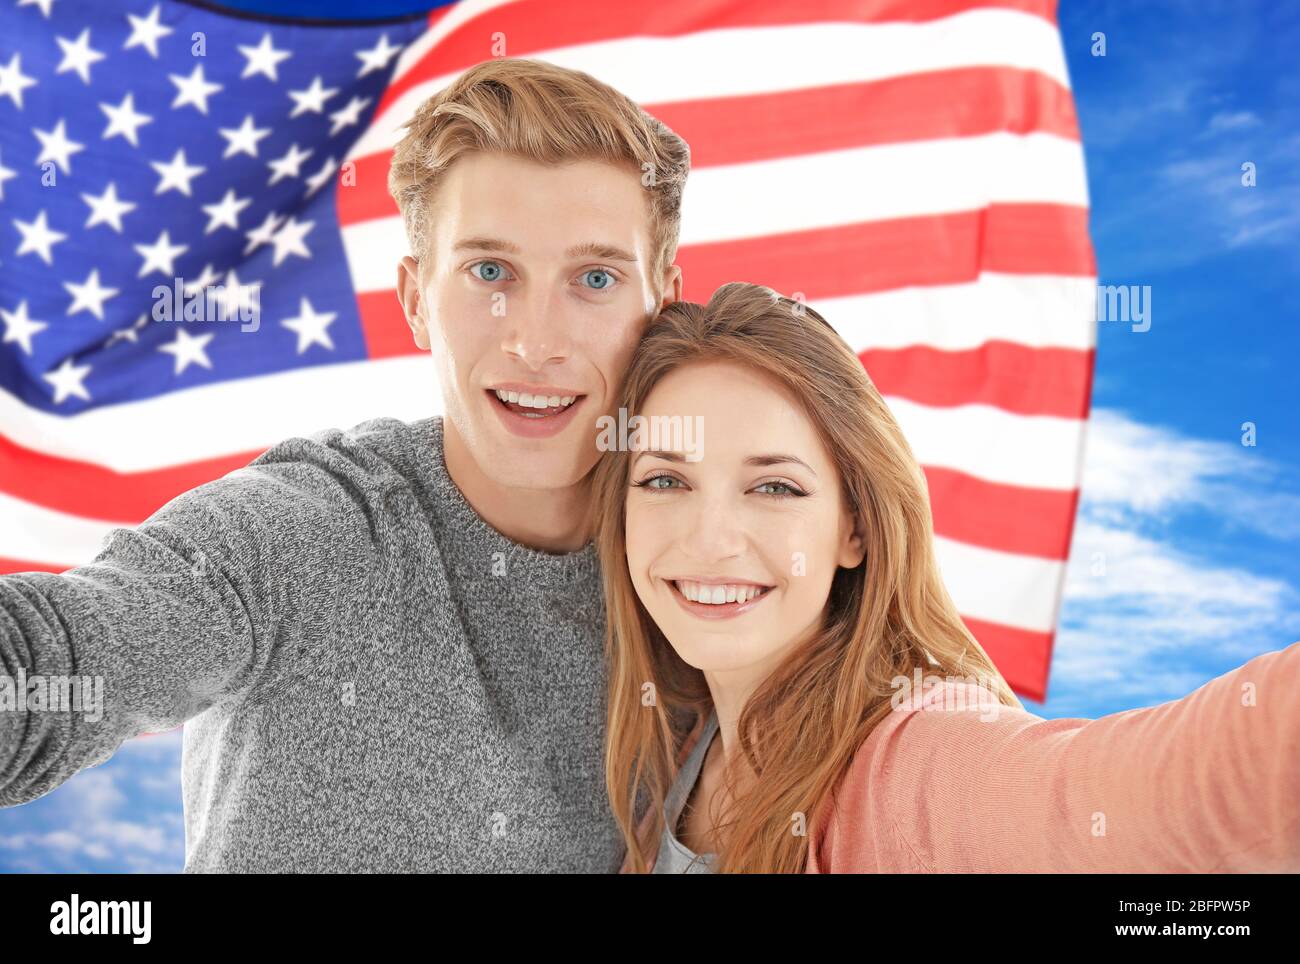 Young couple tacking selfie and USA flag on background Stock Photo